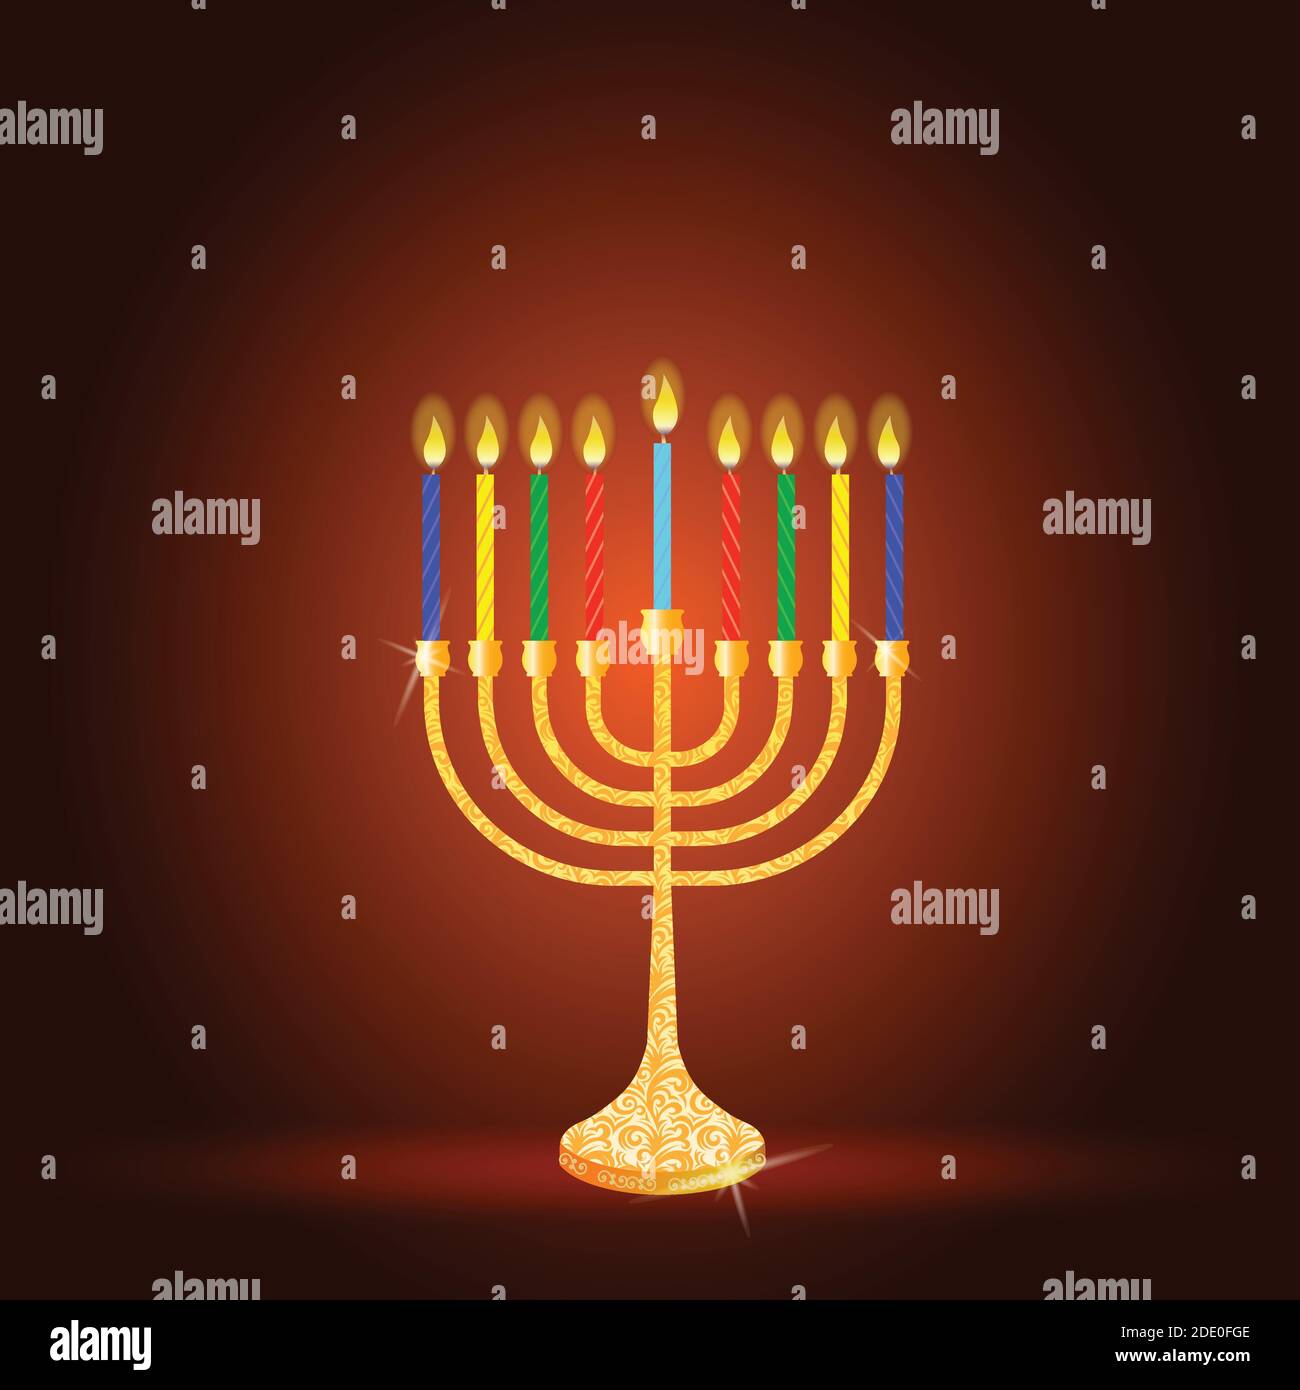 Happy Hanukkah, Jewish Festival of Lights scene with people, happy families with children. Background with menorah (traditional candelabra) and candle Stock Vector